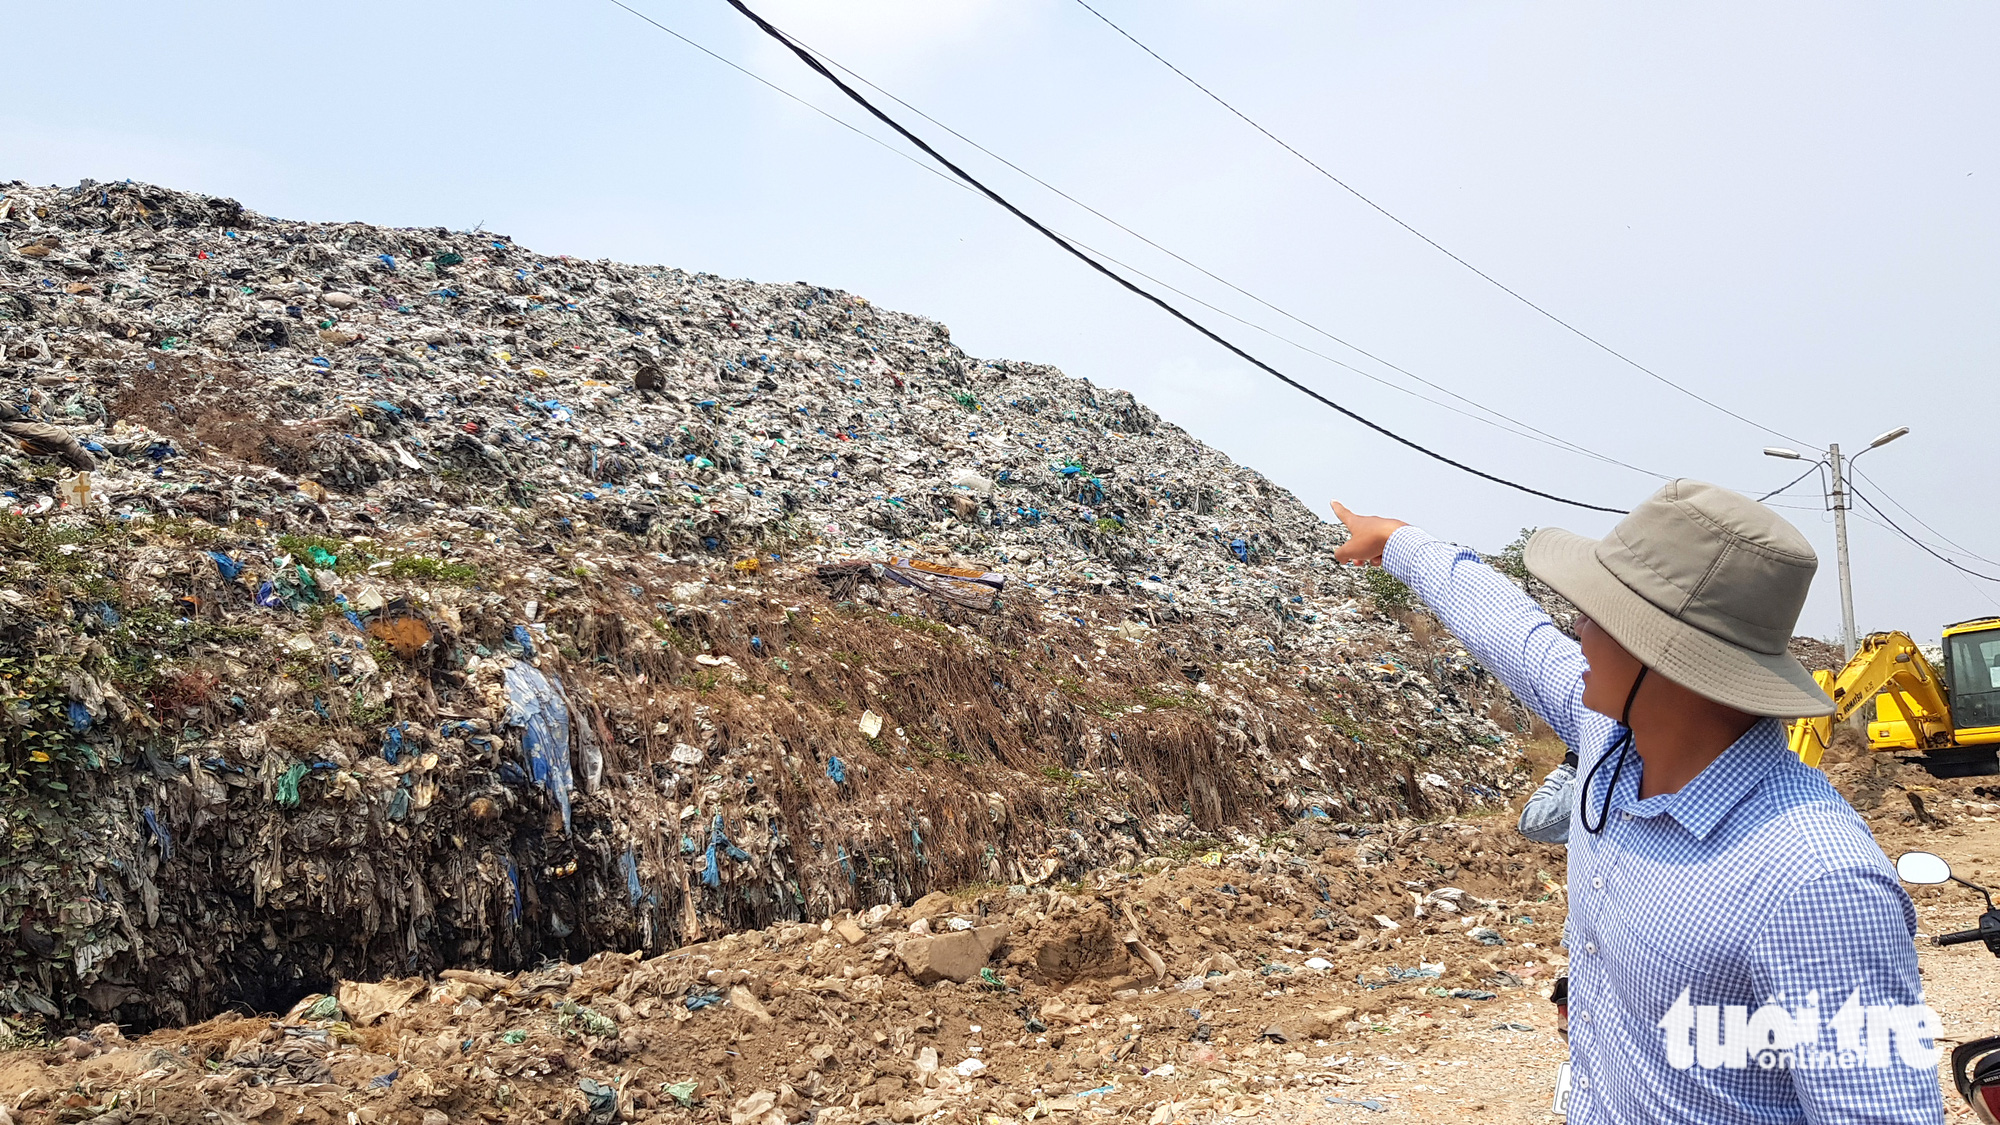 A mountain of garbage nearly 35-meters high in An Giang Province, southern Vietnam. Photo: Buu Dau / Tuoi Tre